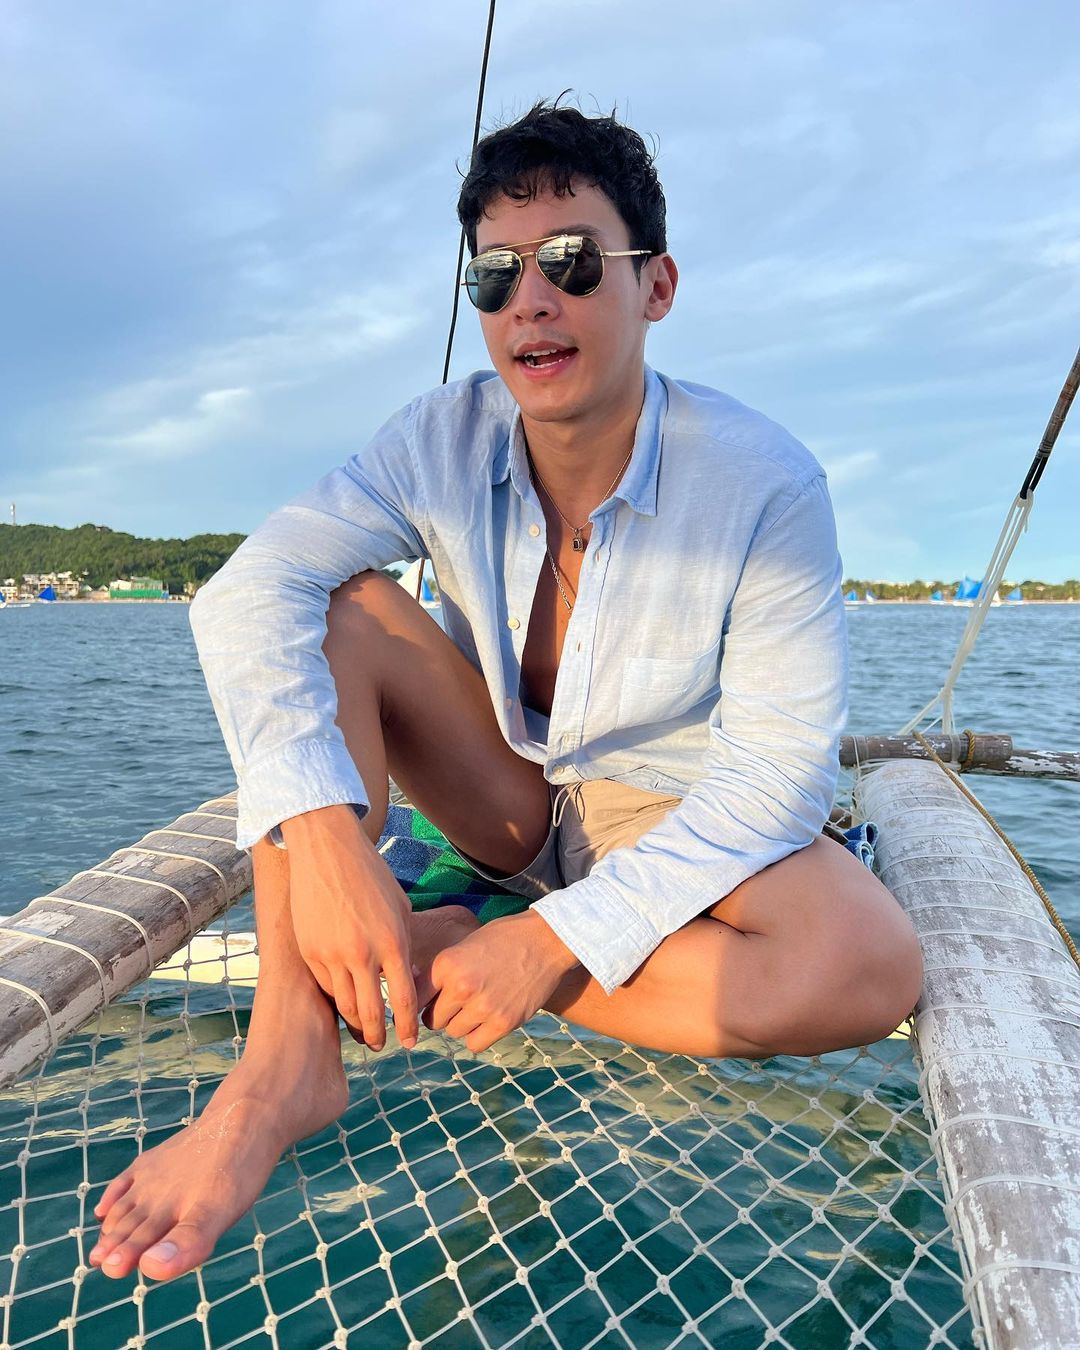 One of the top publications of @mr_enchongdee which has 5.3K likes and 31 comments